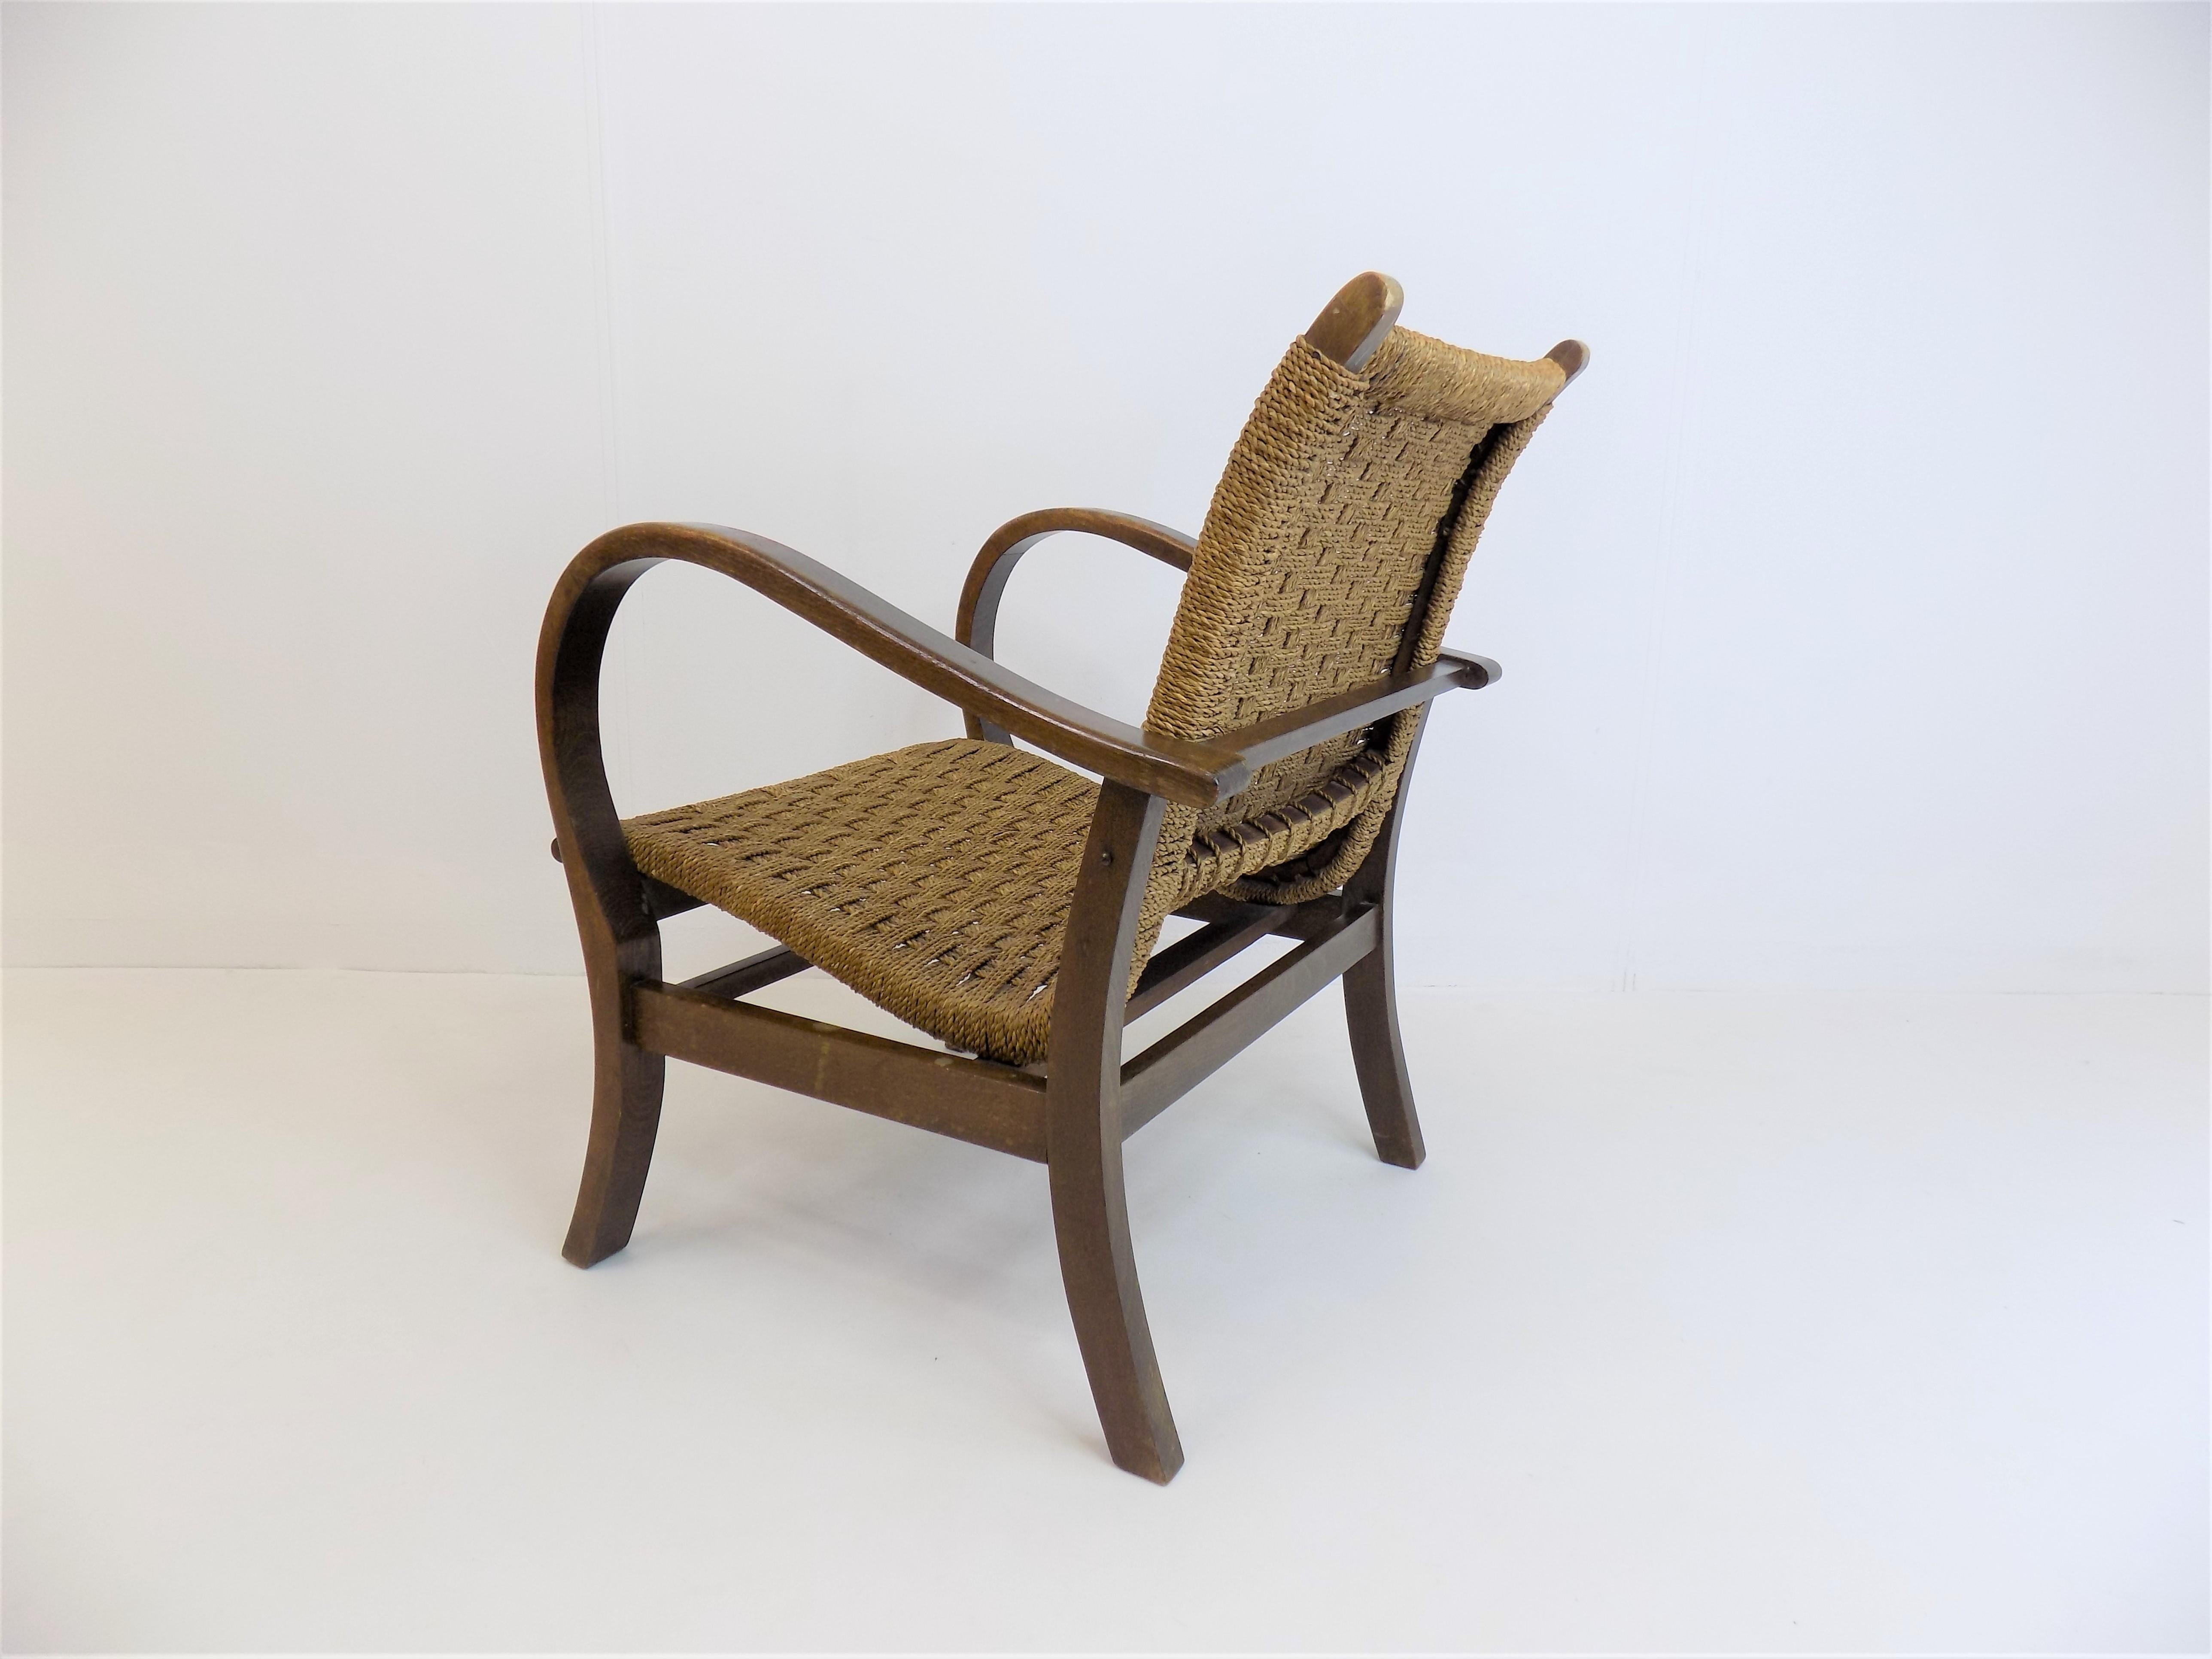 This classic among the Bauhaus chairs is in excellent condition. The rush weave is flawless and strong, the frame made of dark wood shows an attractive patina. The chair allows a very comfortable sitting.

 

Erich Dieckmann designed this